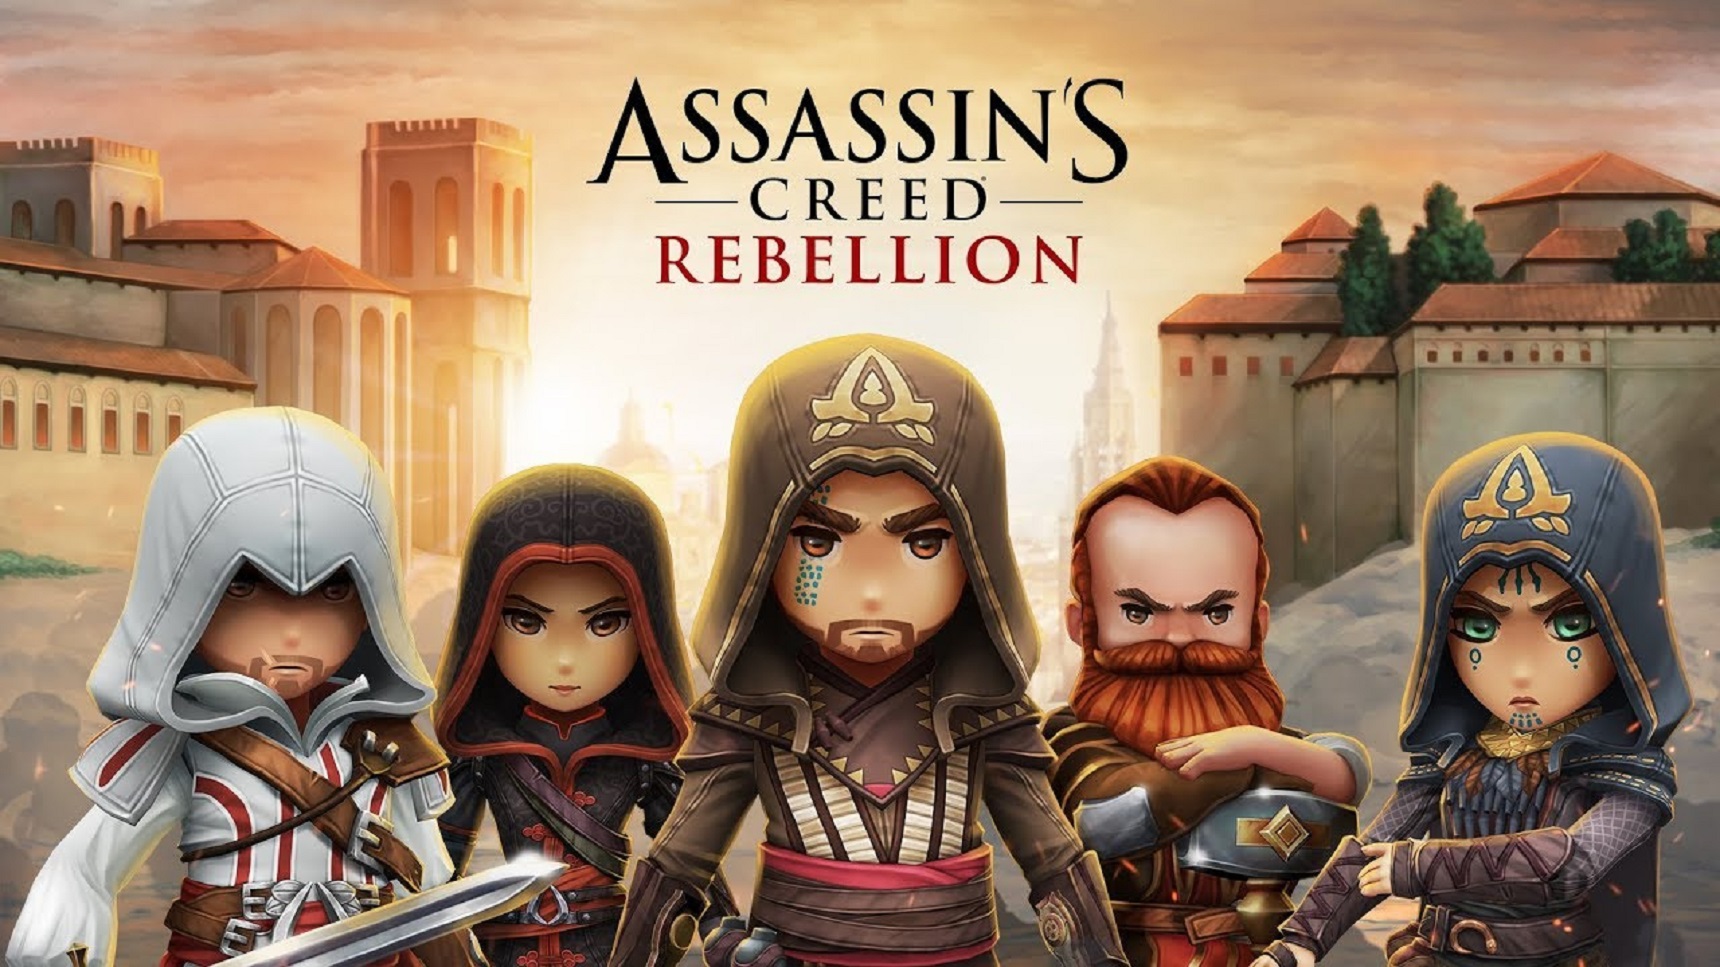 Assassin’s Creed Rebellion MOD APK 3.5.2 + Data Android